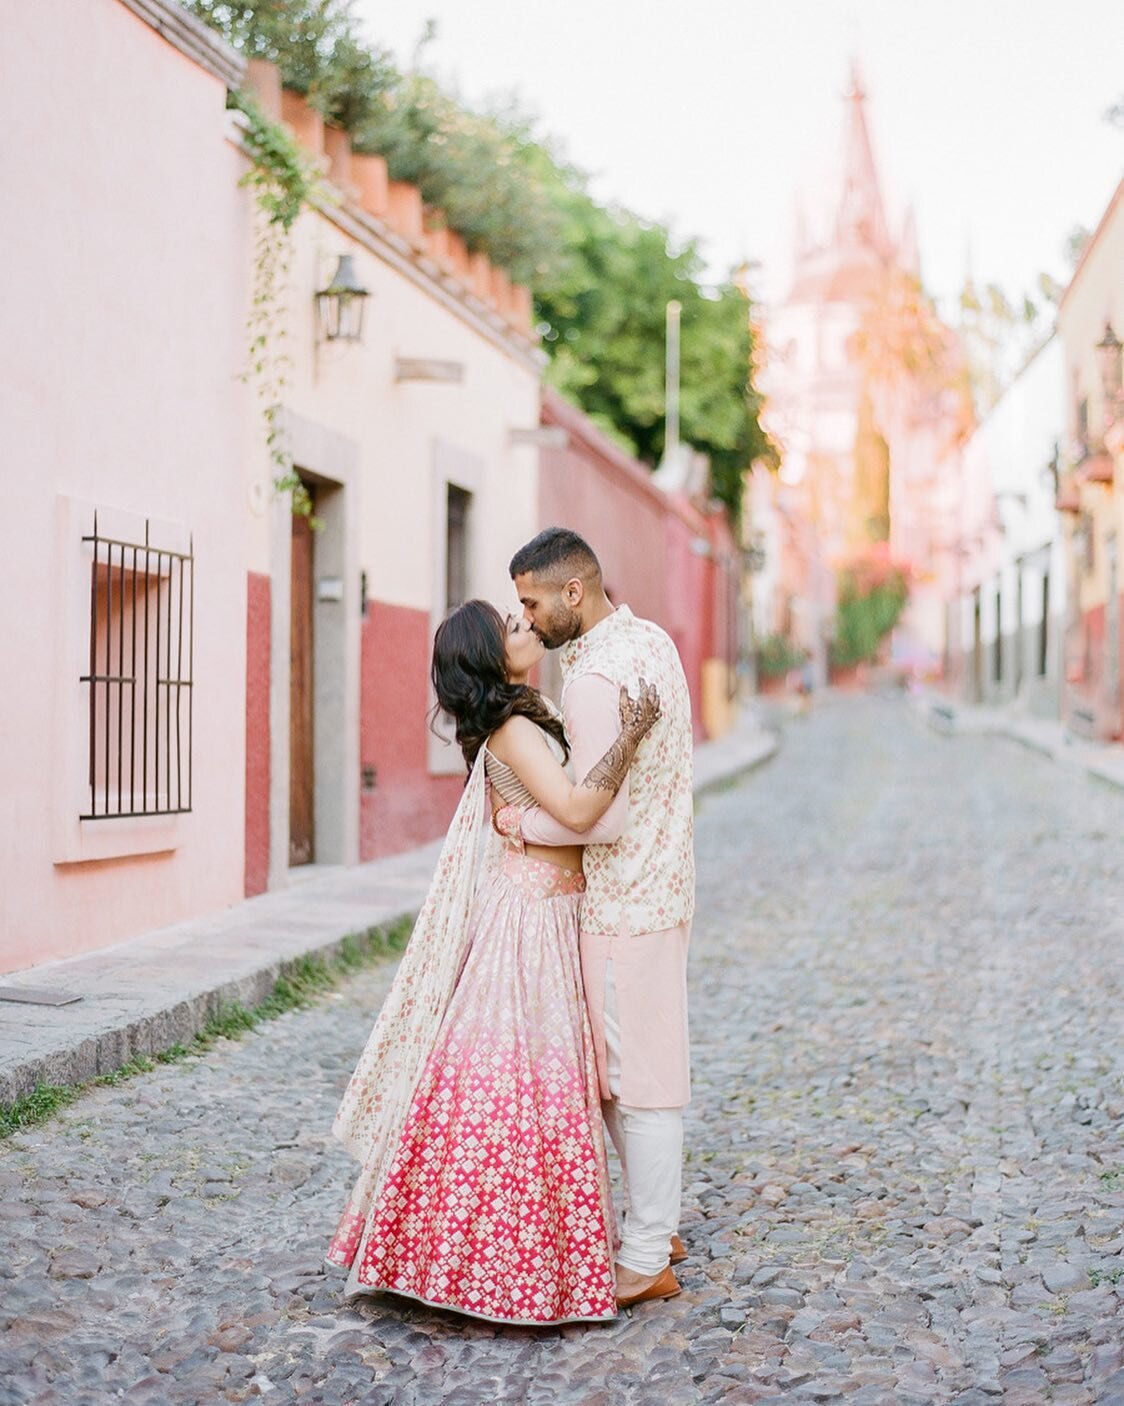 Look who's coming to Style Me Pretty! I can&rsquo;t wait to see Payal &amp; Vince&rsquo;s Sangeet &ldquo;Fiesta&rdquo; on the front page in just a few weeks!
//
Photography: @janinelicarephotography 
Planning: @xanathbanuelos 
Florals: @floweriize 
V